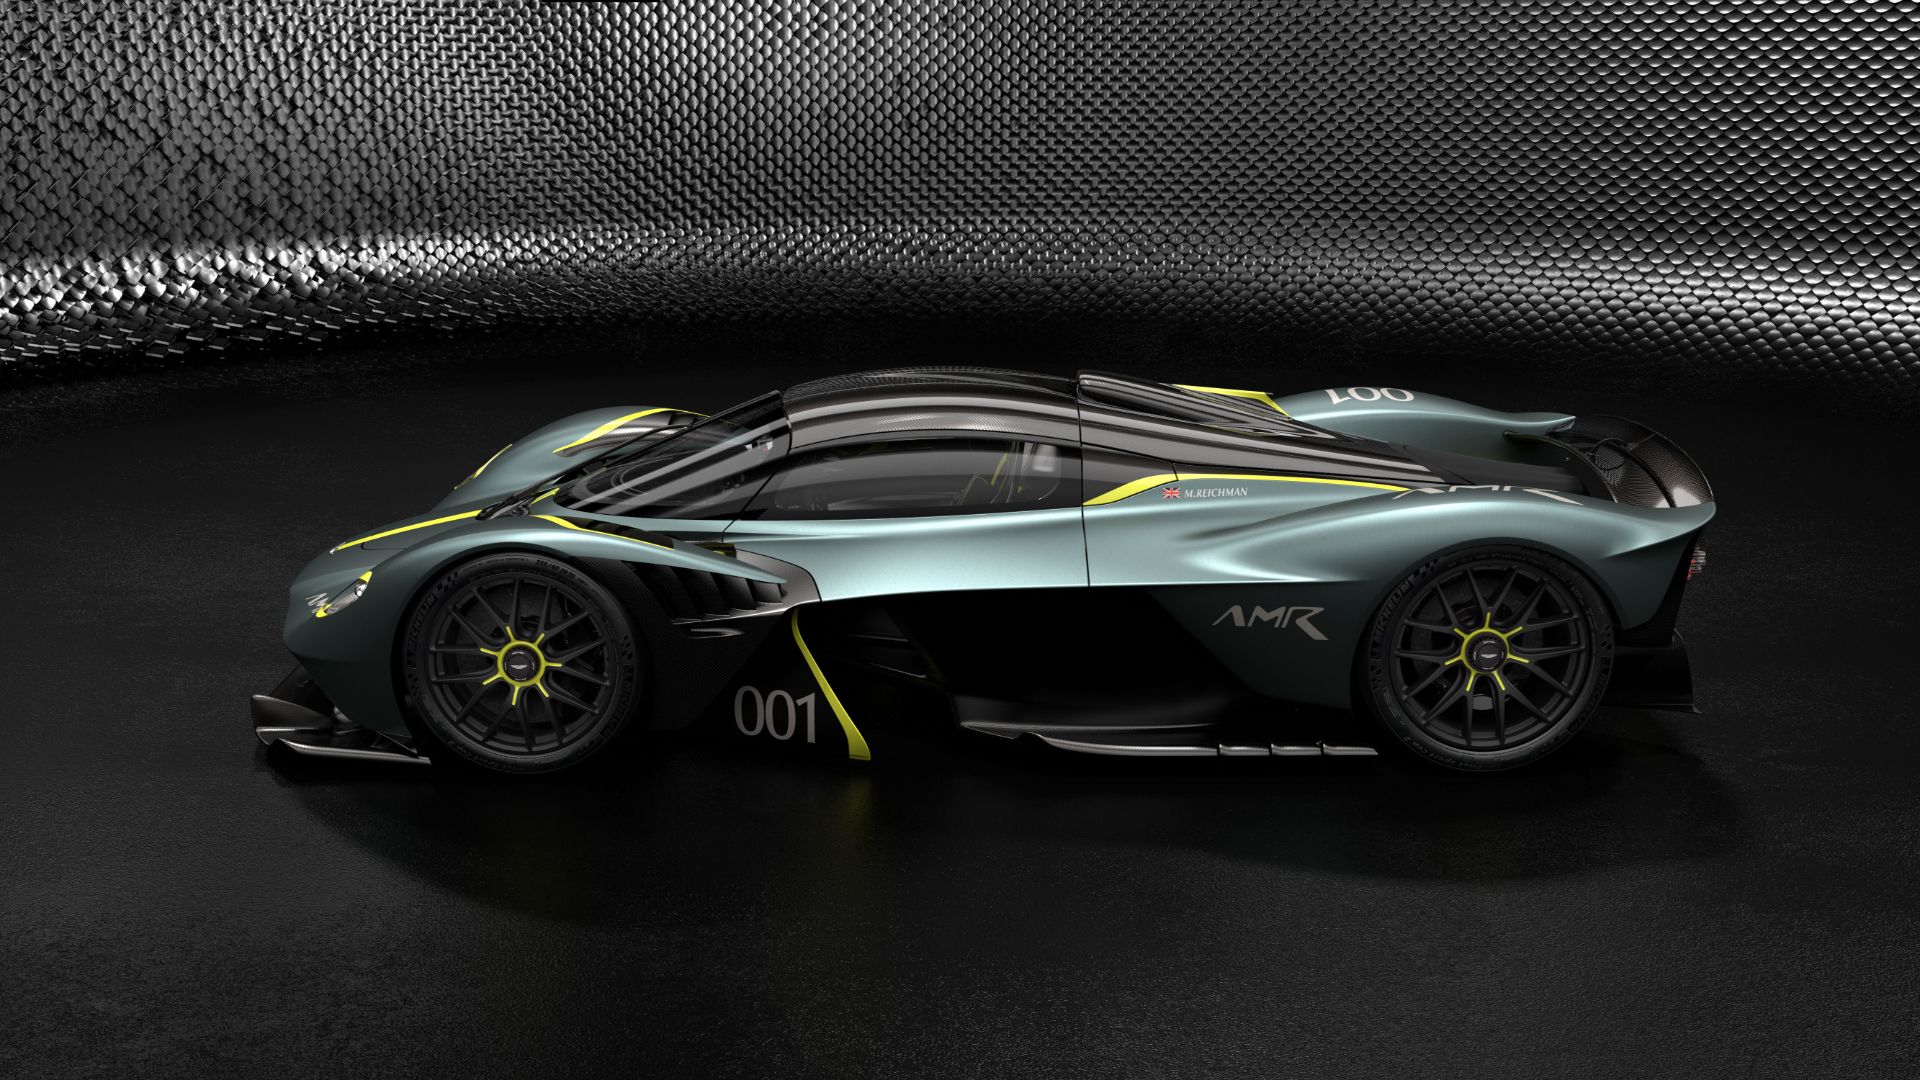 Aston Martin Valkyrie with AMR Track Performance Pack - Stirling Green and Lime livery